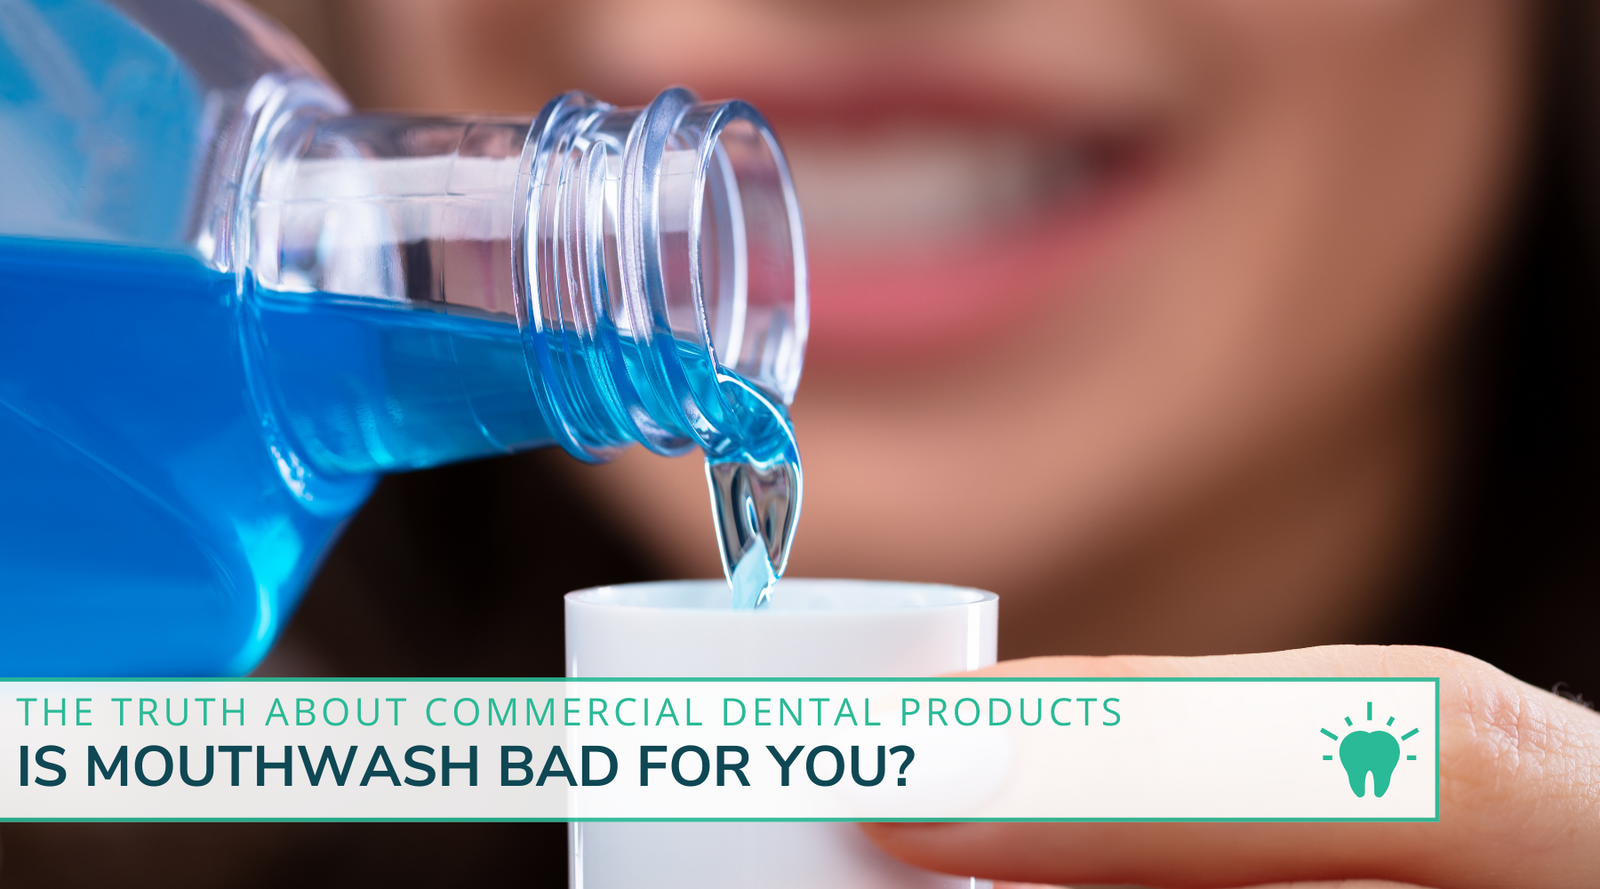 Is Mouthwash Bad For You? The Truth About Commercial Dental Products